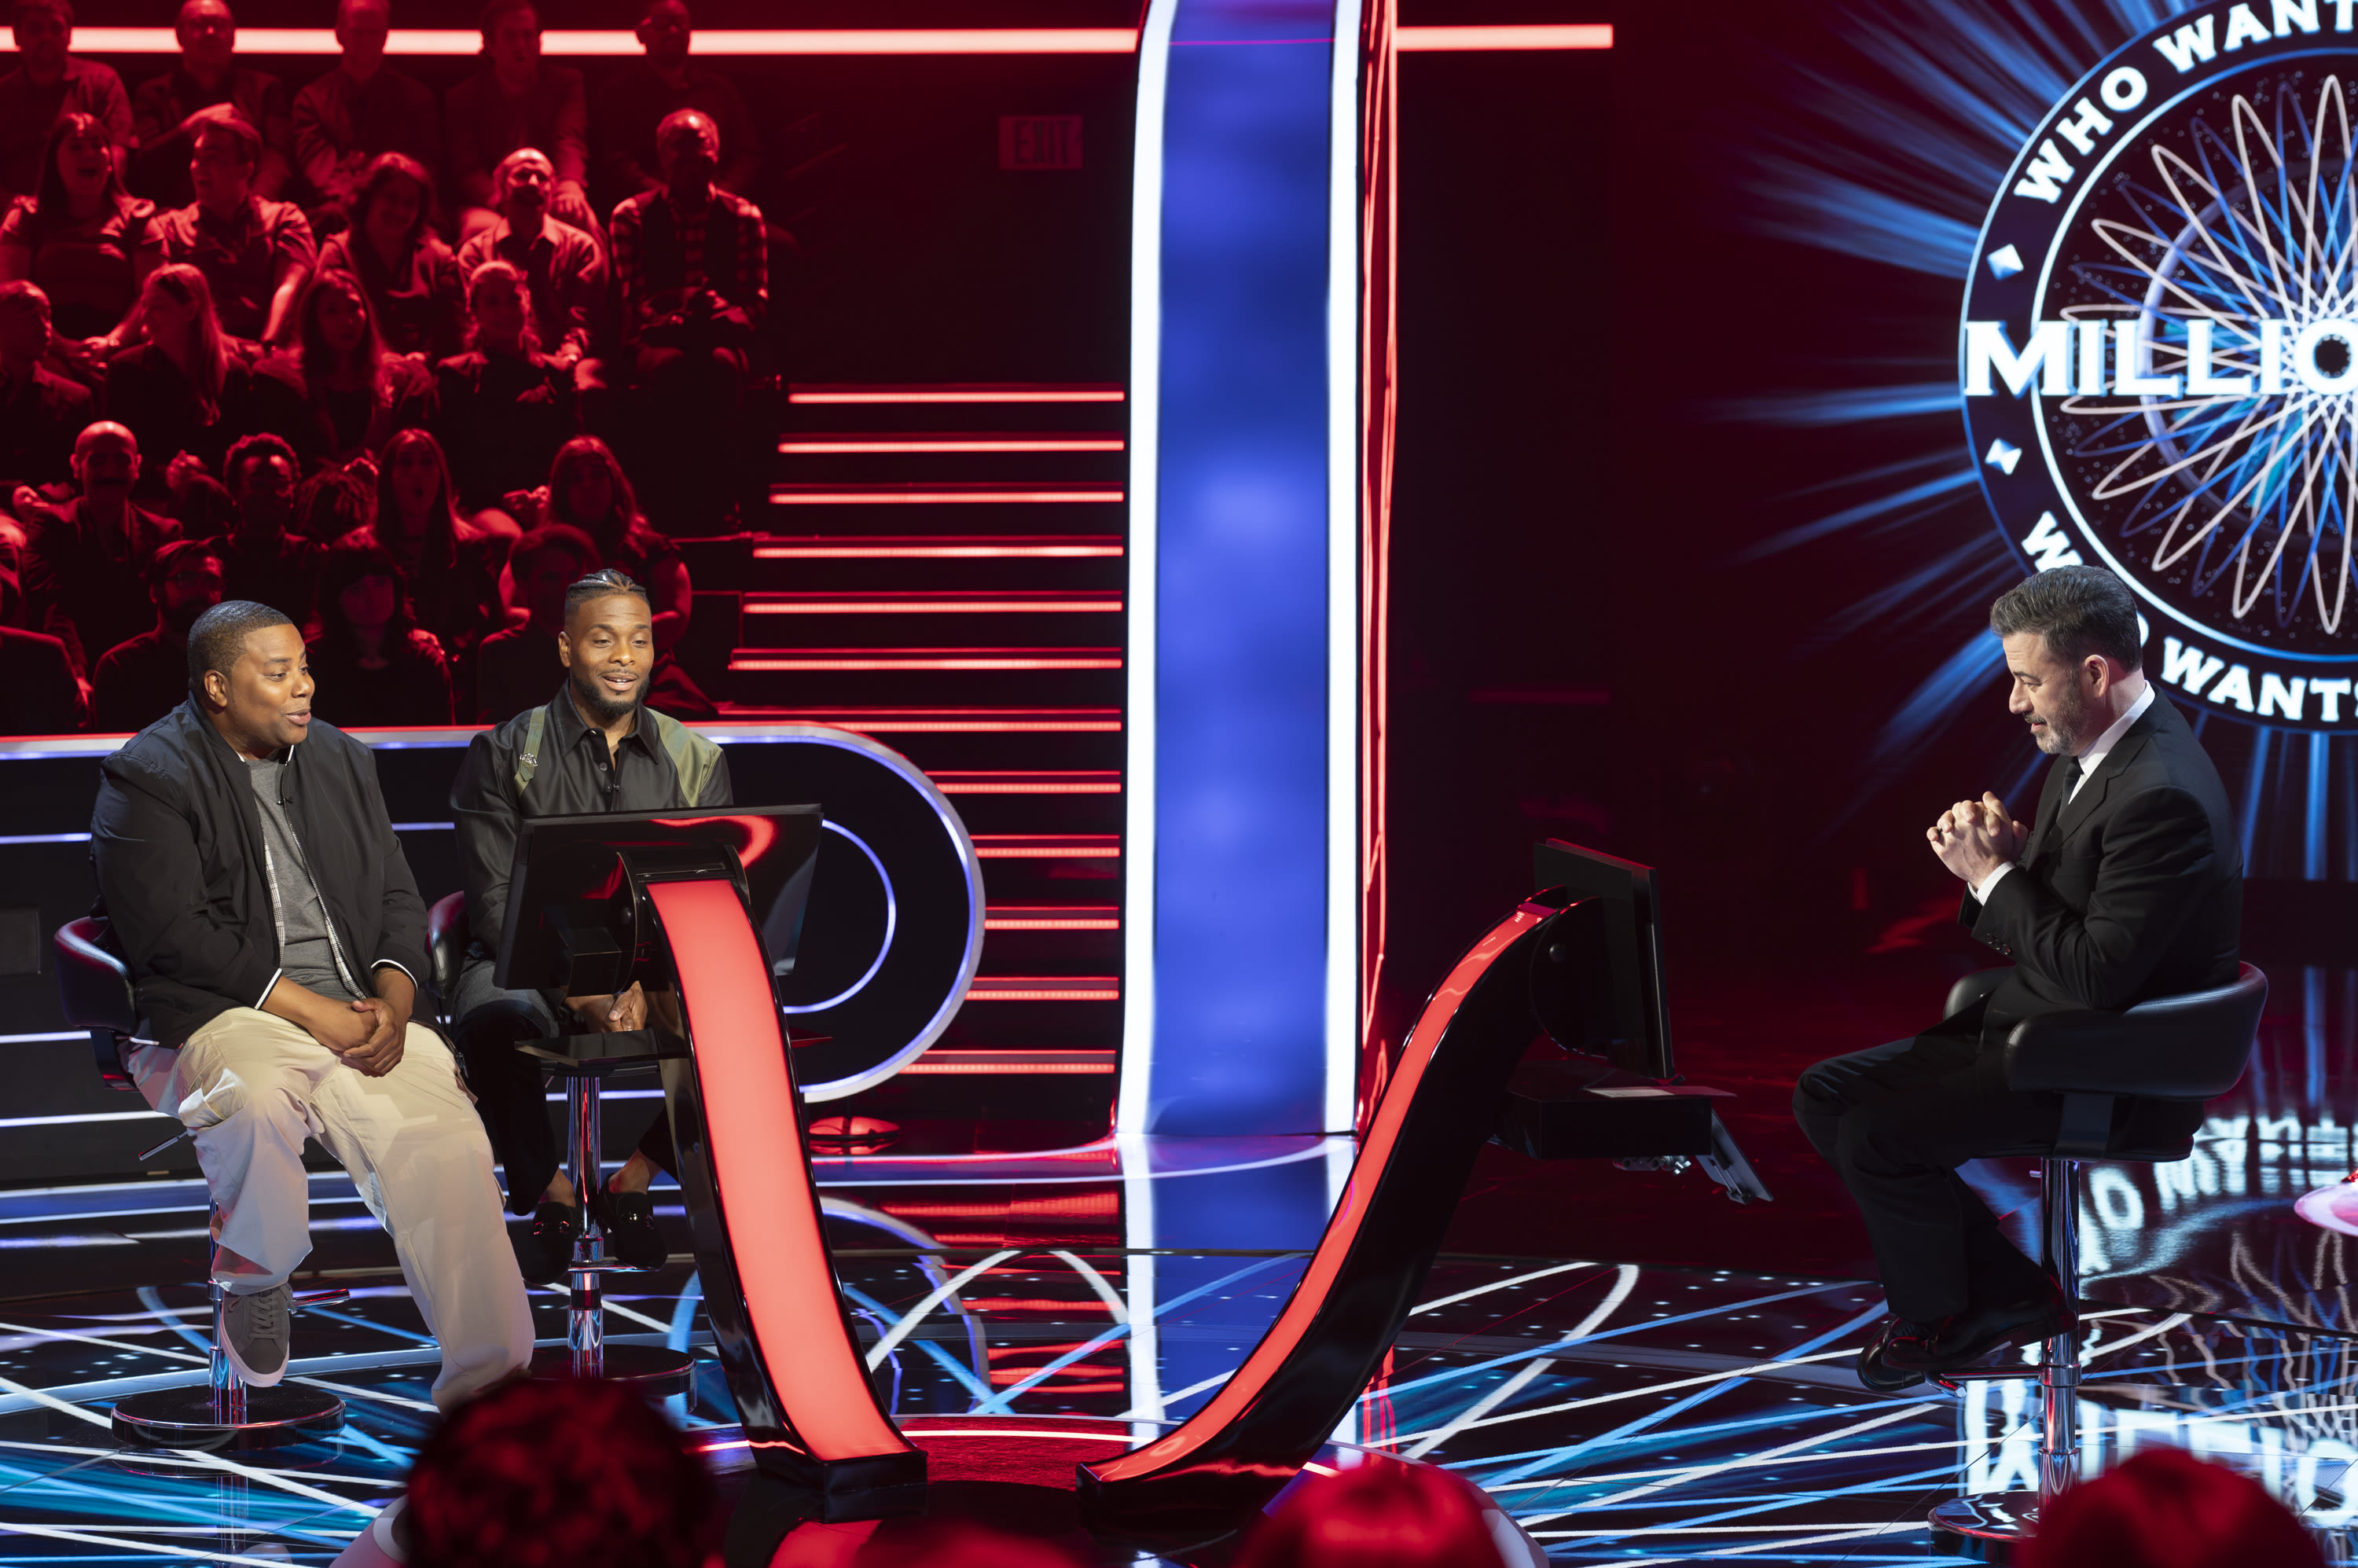 ‘Who Wants to Be a Millionaire’ Return Wins Night in Total Viewers (TV News Roundup)